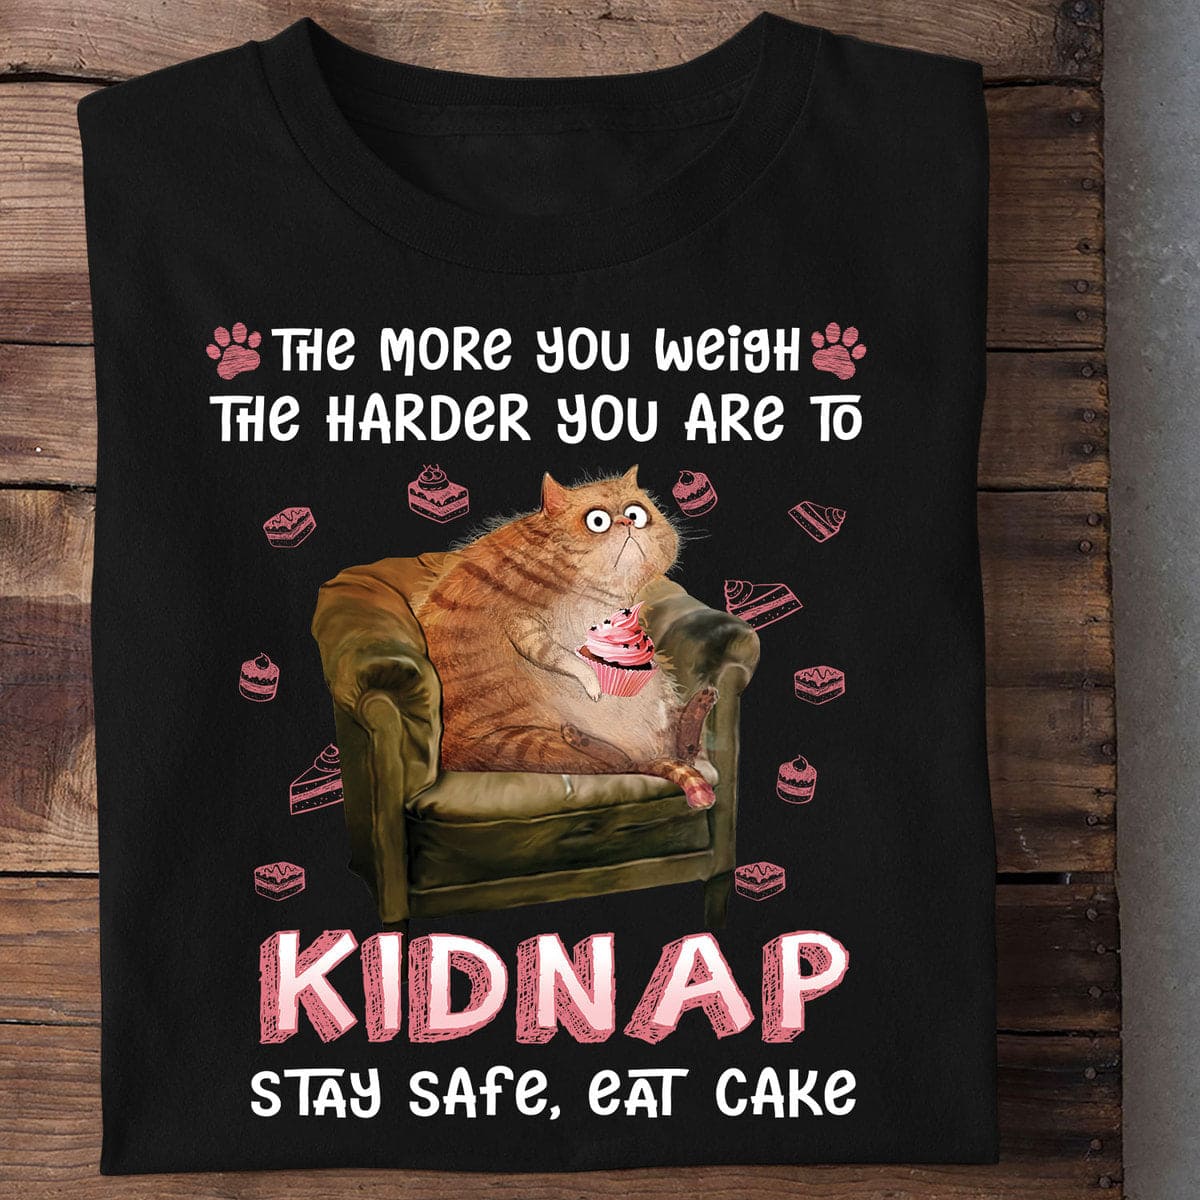 Fat Cat Cupcake - The more you weigh the harder you are to kidnap stay safe eat cake